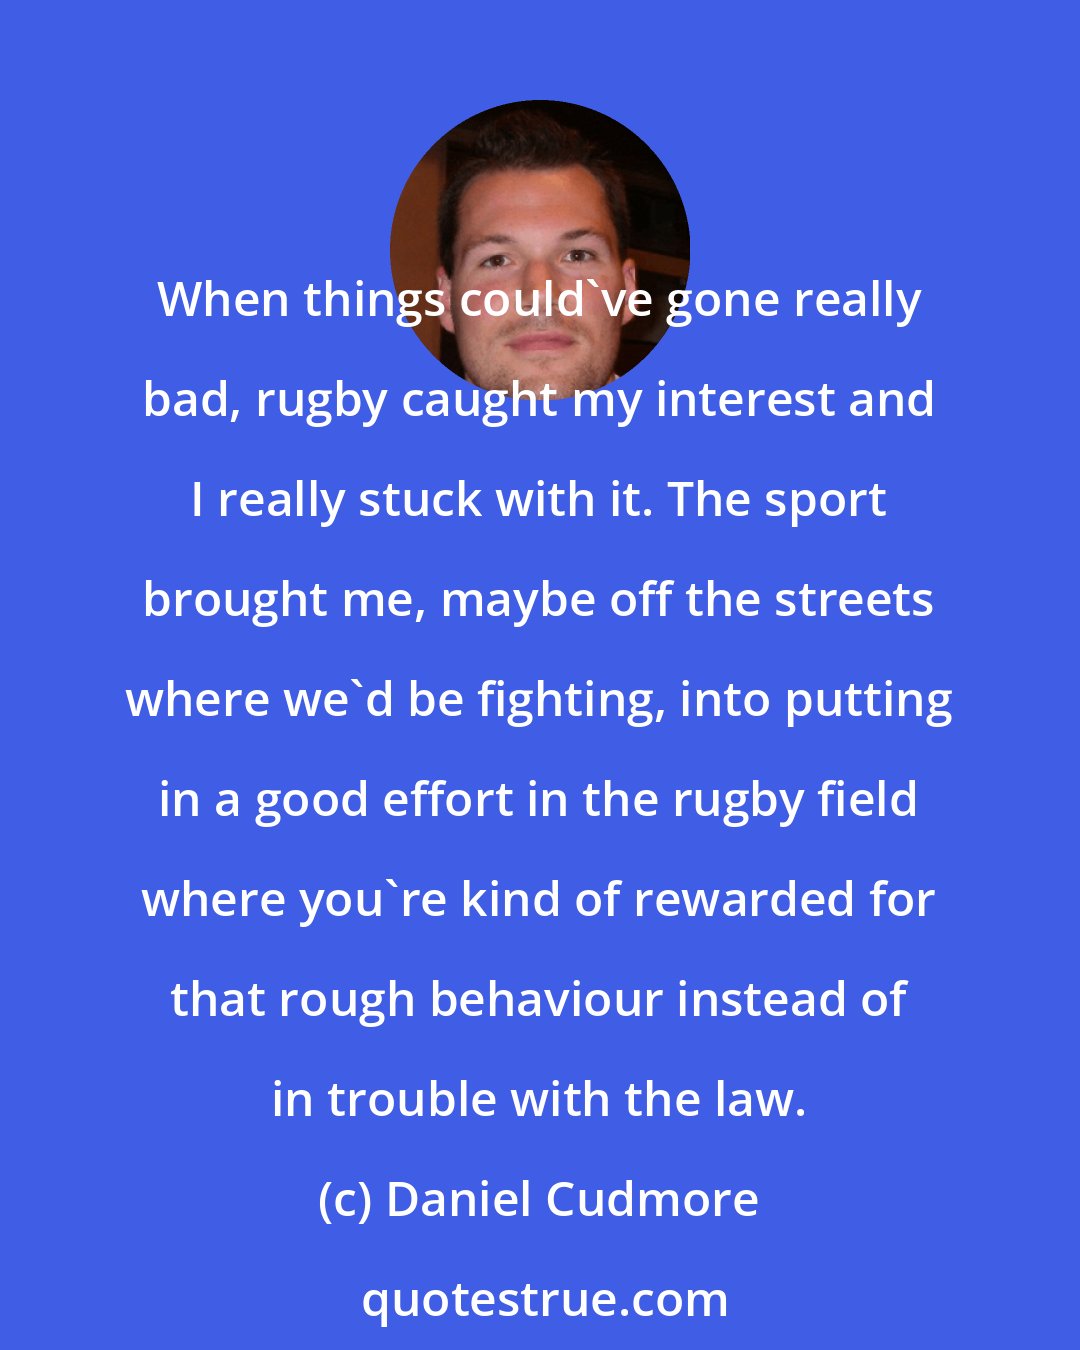 Daniel Cudmore: When things could've gone really bad, rugby caught my interest and I really stuck with it. The sport brought me, maybe off the streets where we'd be fighting, into putting in a good effort in the rugby field where you're kind of rewarded for that rough behaviour instead of in trouble with the law.